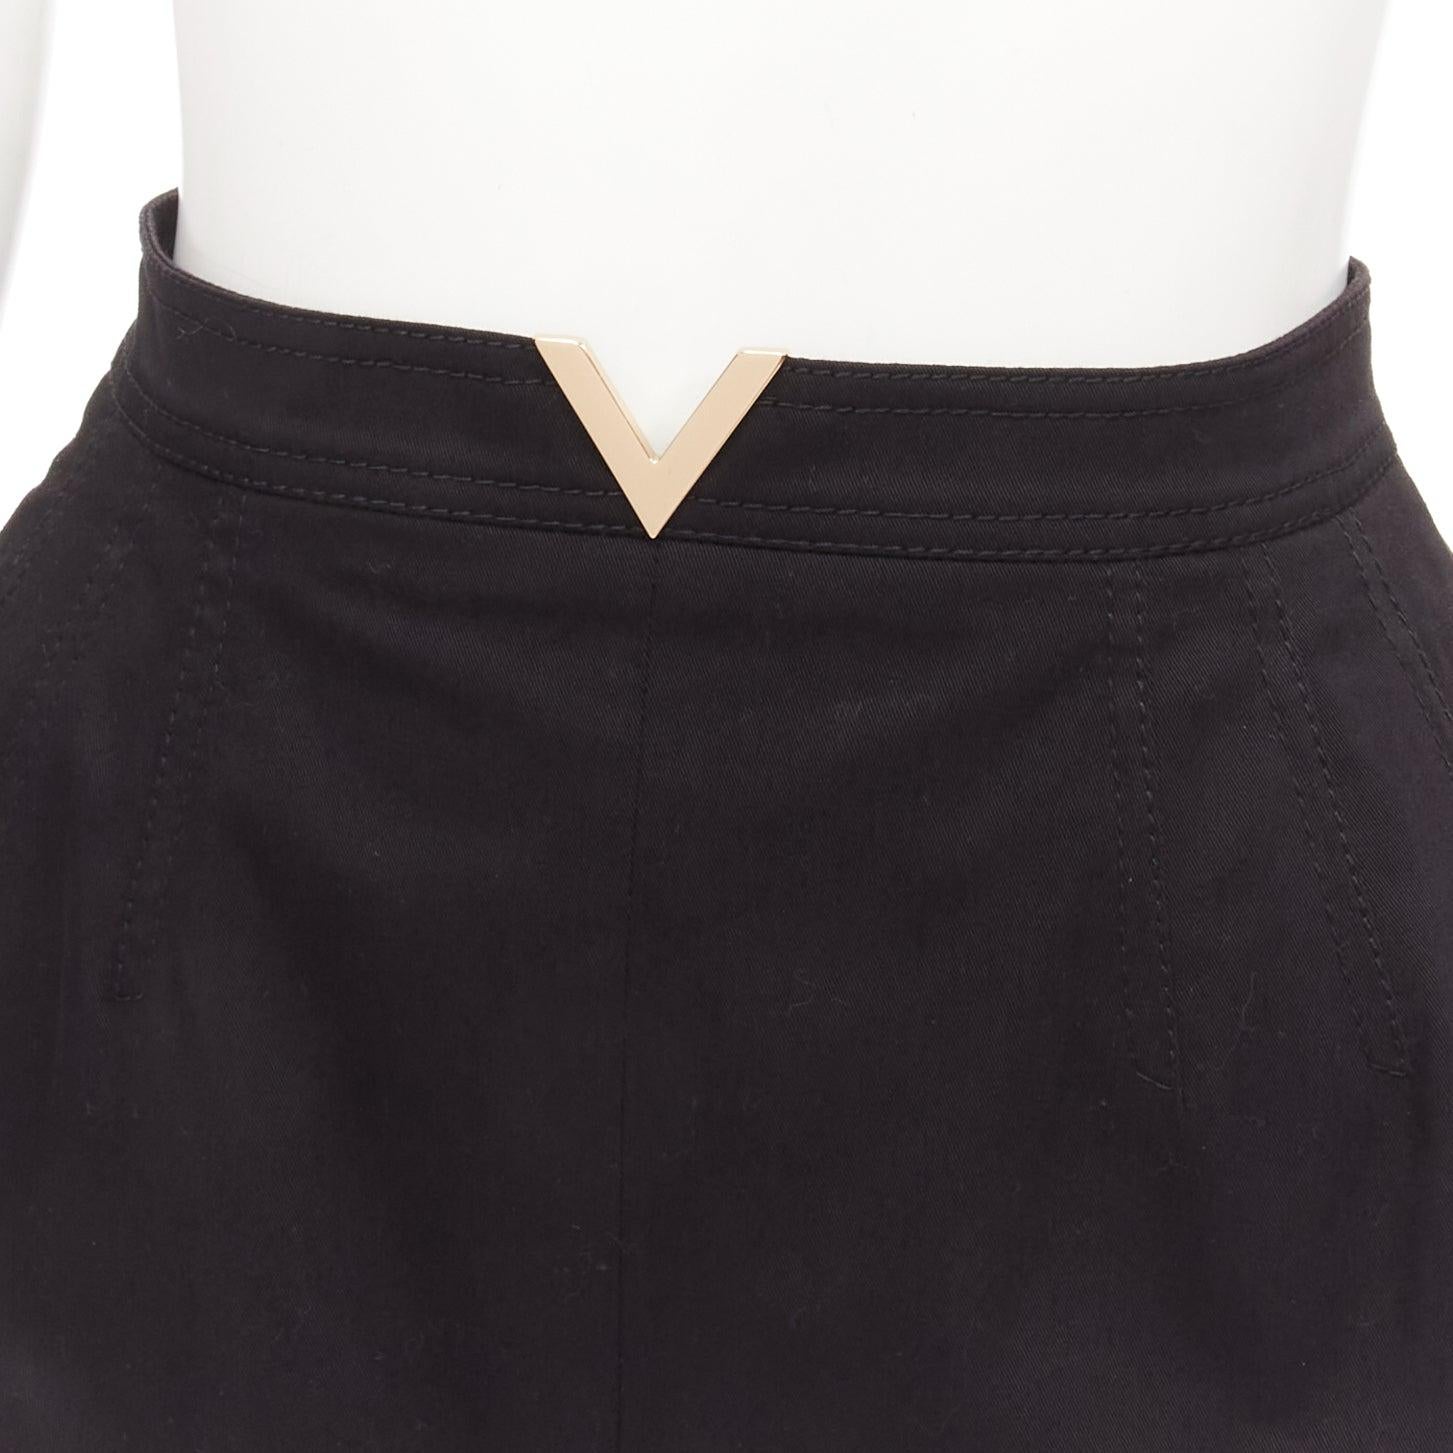 VALENTINO VLOGO gold tone metal hardware black 60's mini skirt skorts IT38 XS
Reference: AAWC/A00357
Brand: Valentino
Designer: Pier Paolo Piccioli
Material: Cotton, Blend
Color: Black, Gold
Pattern: Solid
Closure: Zip
Lining: Fabric
Made in: